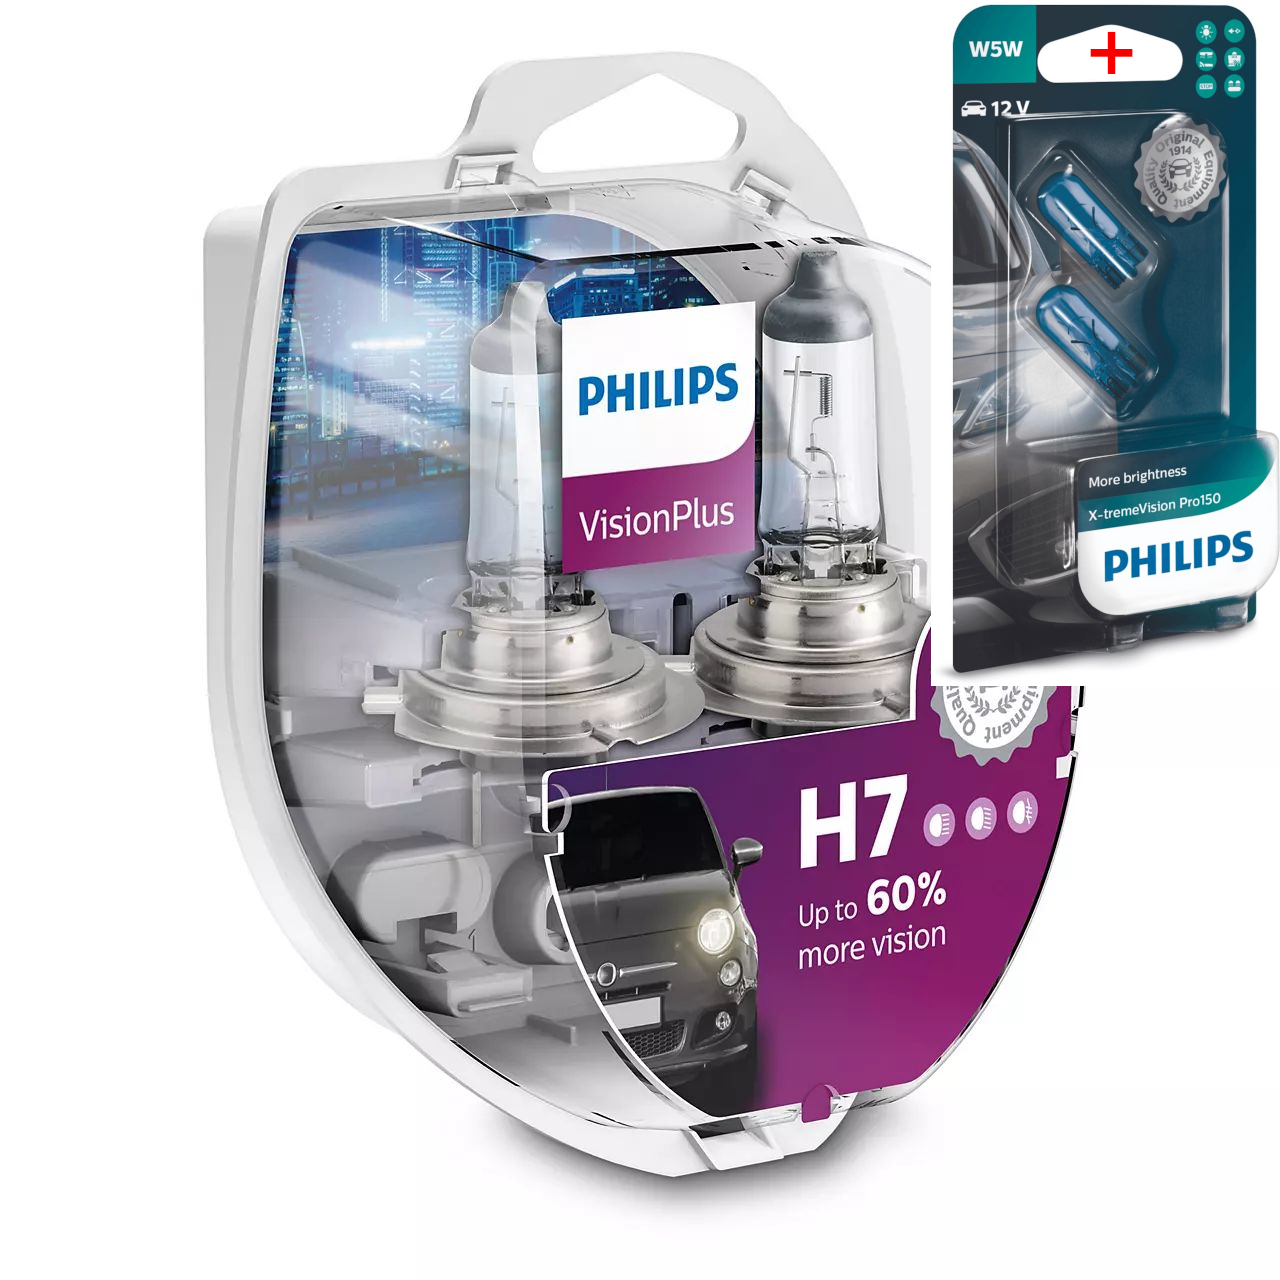 Philips X-tremeVision Pro150 H1 H4 H7 Alle Typen Freie Wahl 2 Stk.